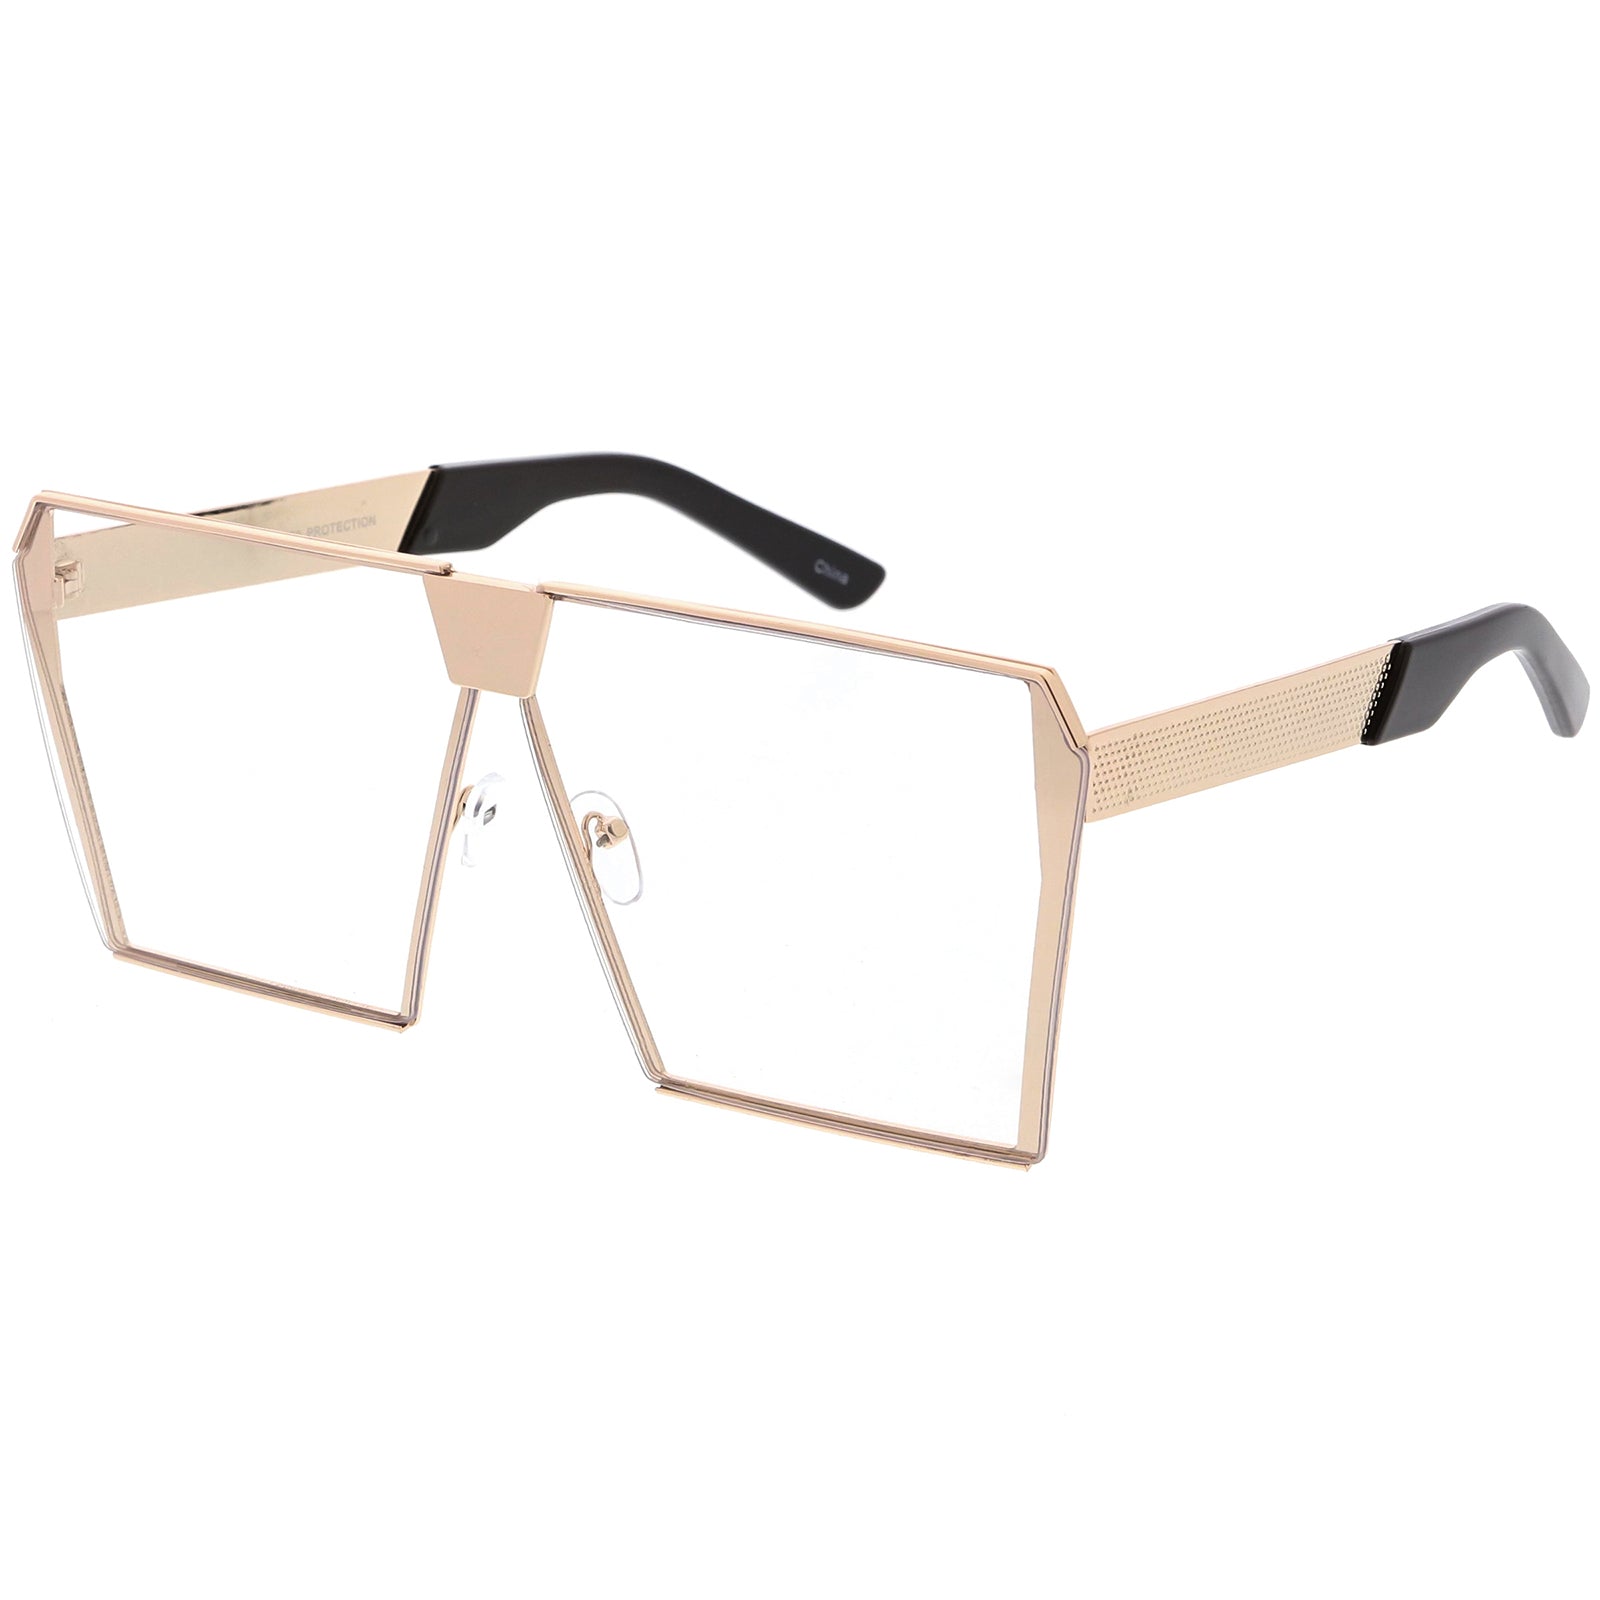 Modern Oversize Semi Rimless Square Eyeglasses With Clear Flat Lens 69mm